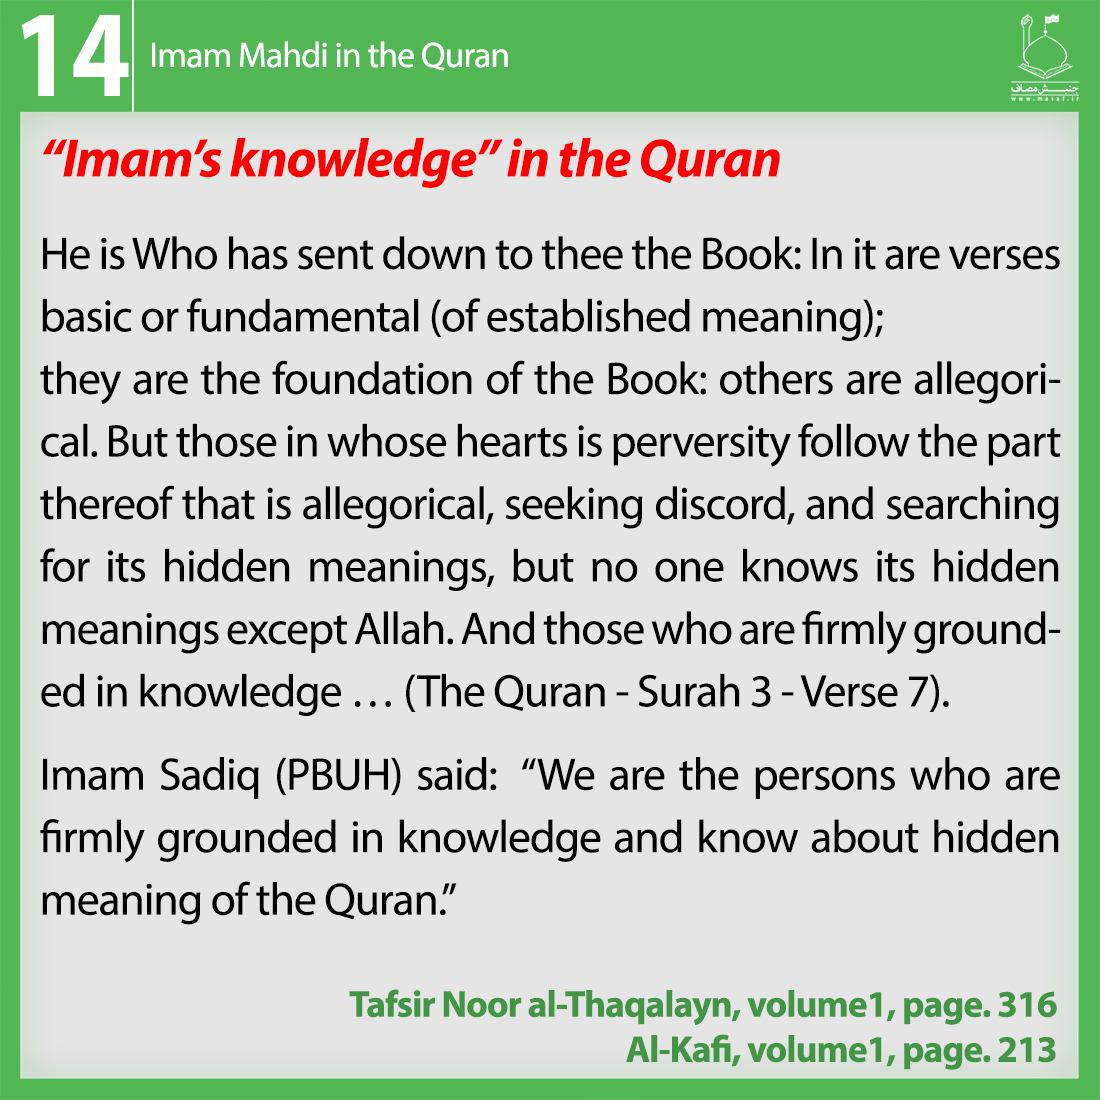 12th imam in the quran